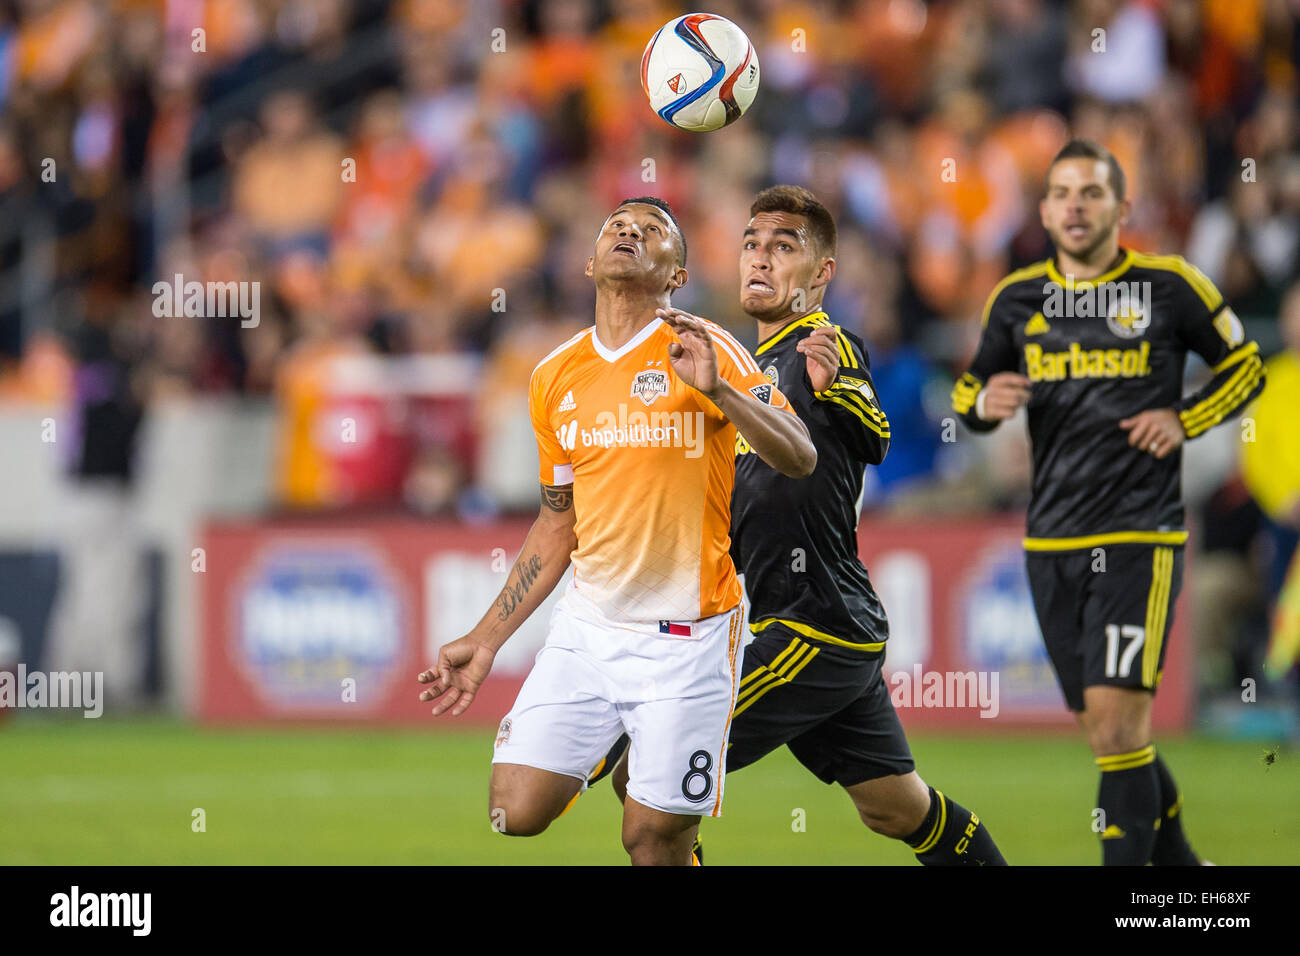 Houston, Texas, USA. 7th Mar, 2015. Houston Dynamo midfielder Luis Garrido (8) looks to make a header during an MLS game between the Houston Dynamo and the Columbus Crew at BBVA Compass Stadium in Houston, TX on March 7th, 2015. The Dynamo won 1-0. © Trask Smith/ZUMA Wire/Alamy Live News Stock Photo